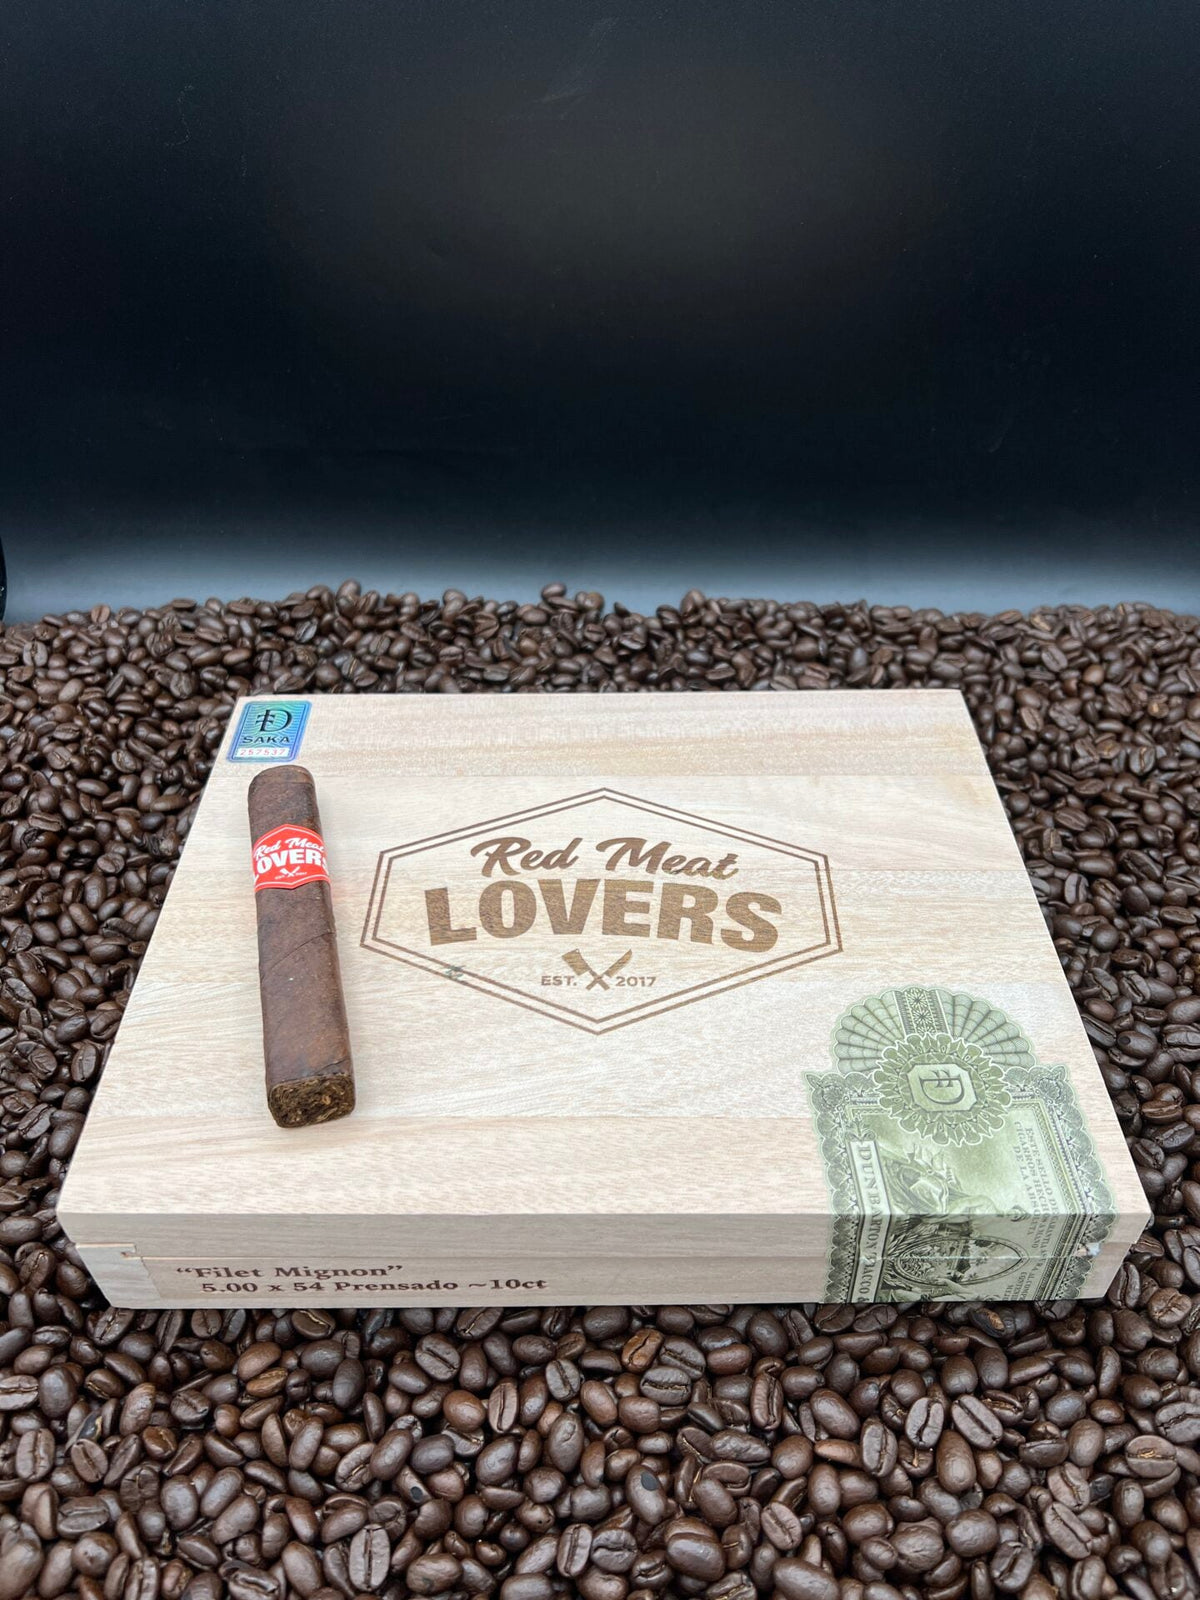 Dunbarton Tobacco &amp; Trust - Red Meat Lovers &quot;Filet Mignon&quot; cigars supplied by Sir Louis Cigars